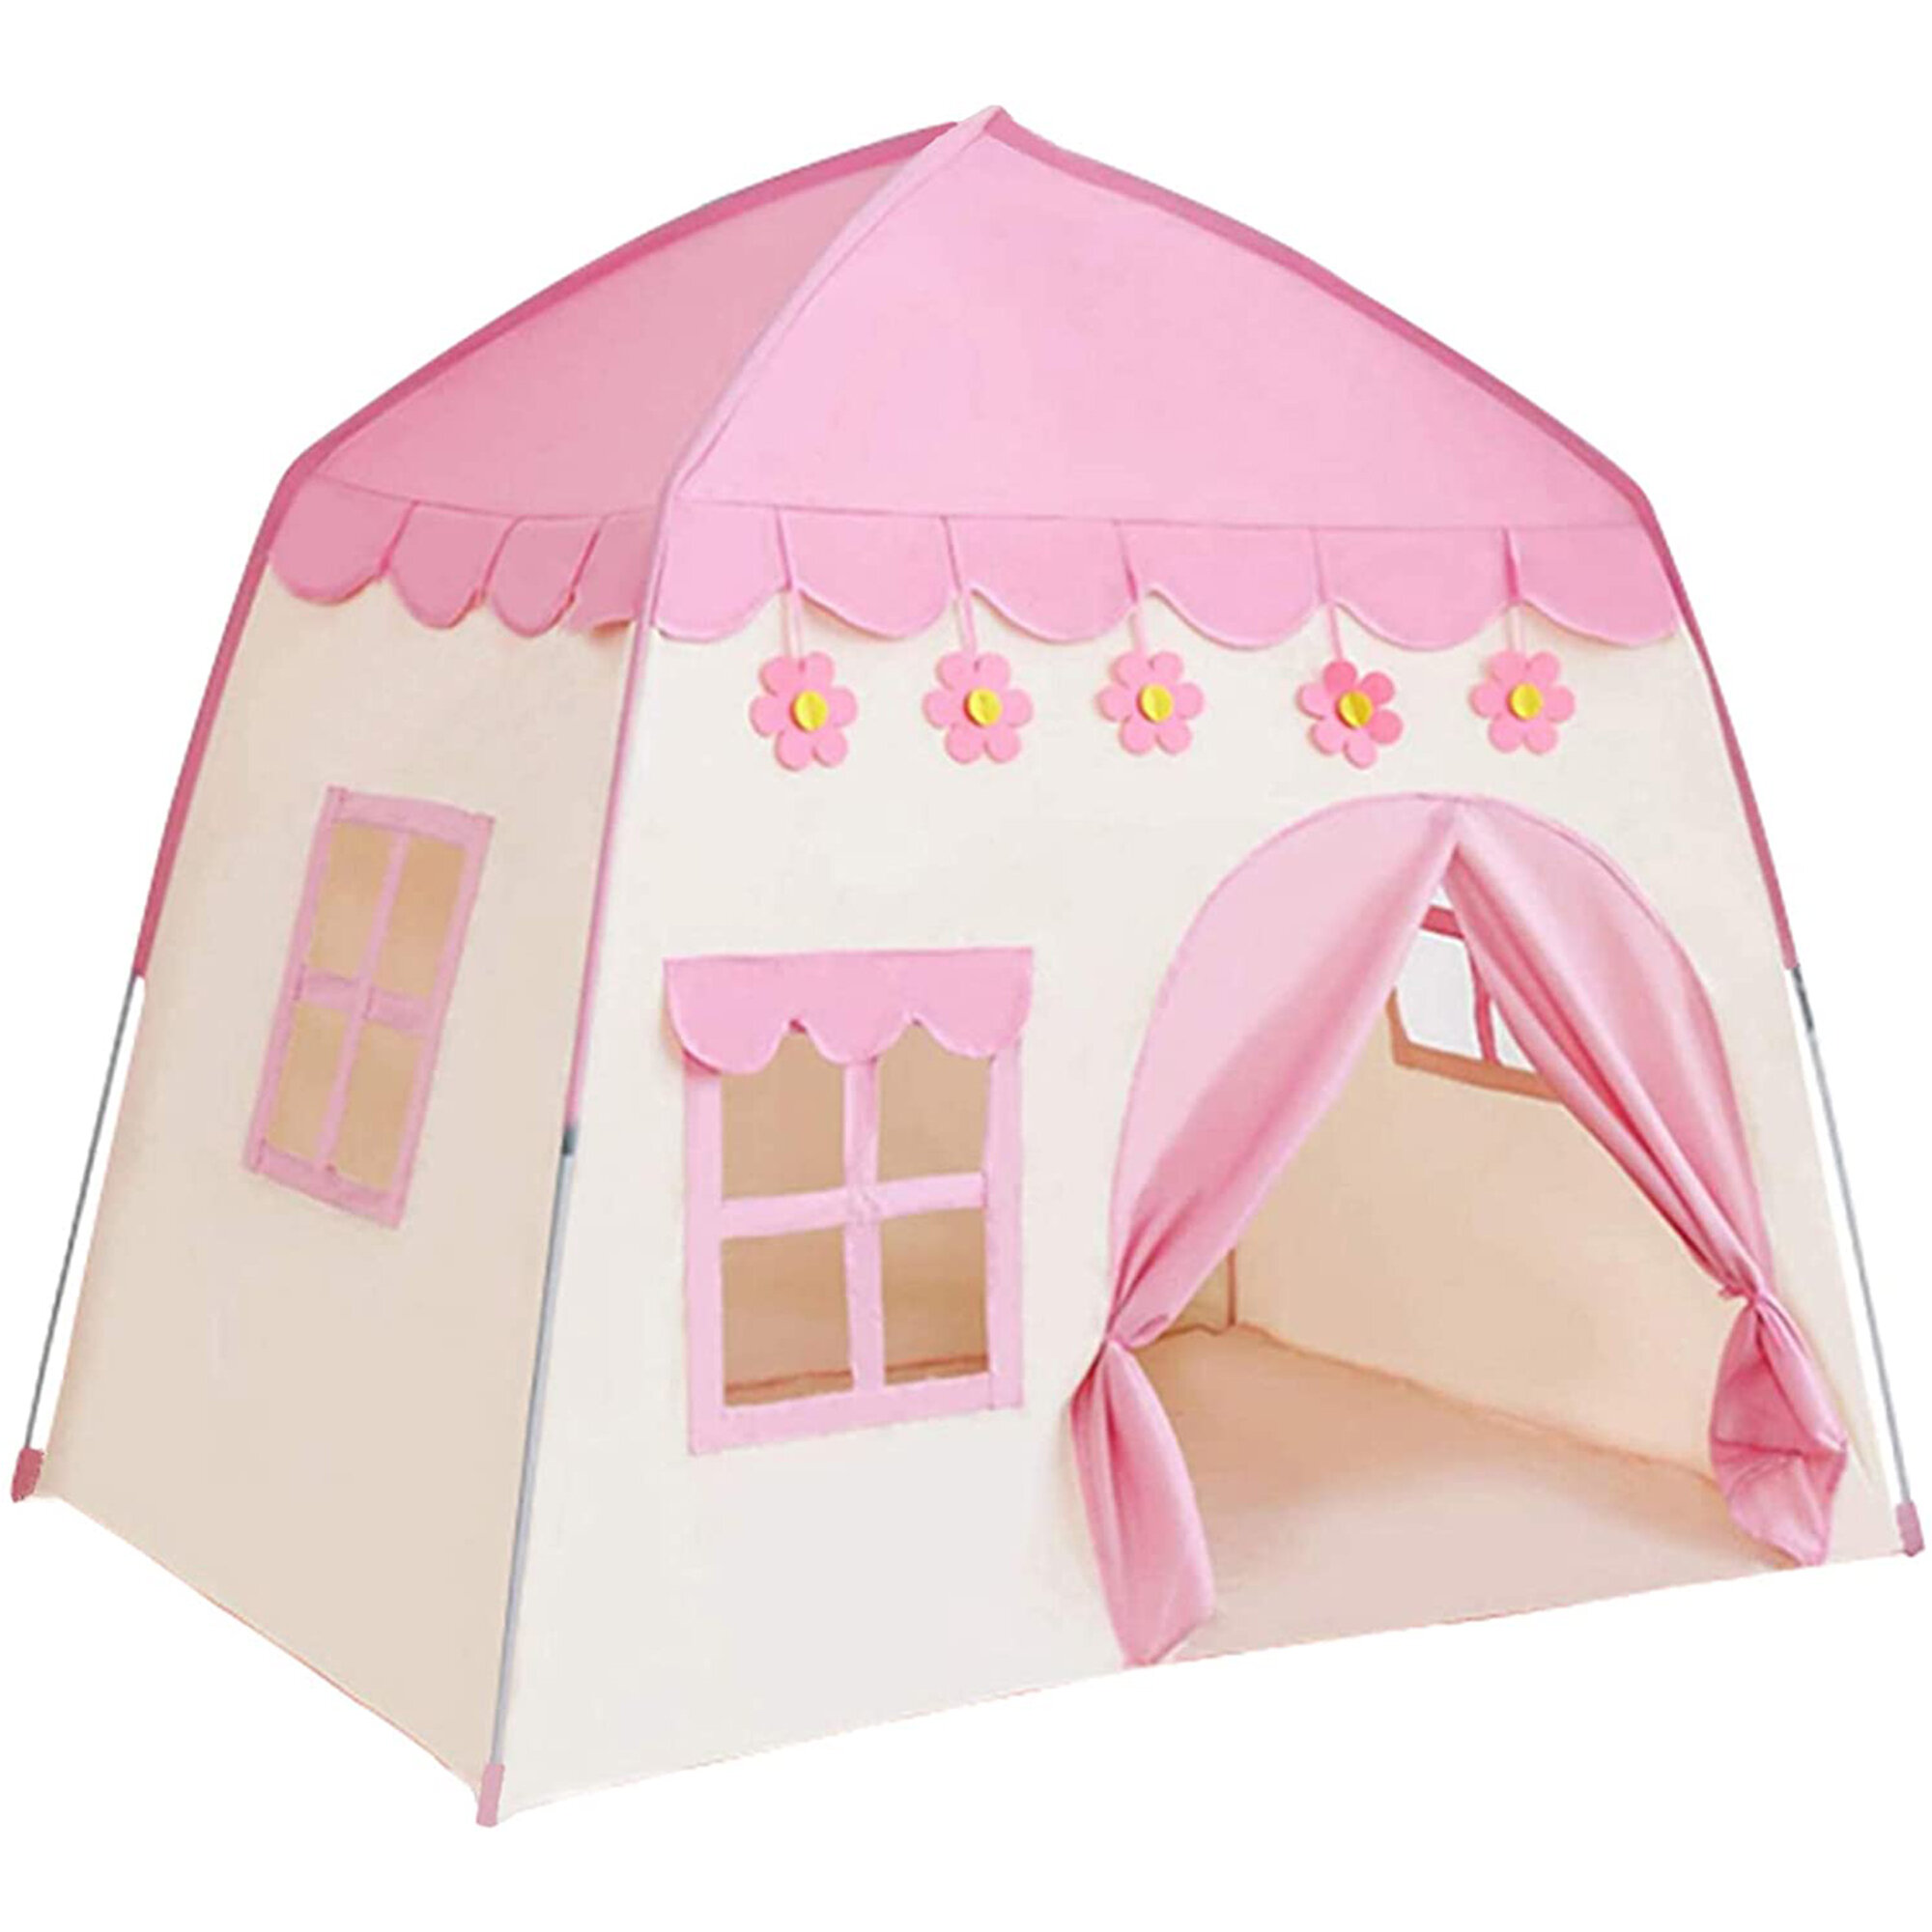 Portable Baby Play Tent Playhouse Castle House Kids Toy Bedroom Camping Funny US